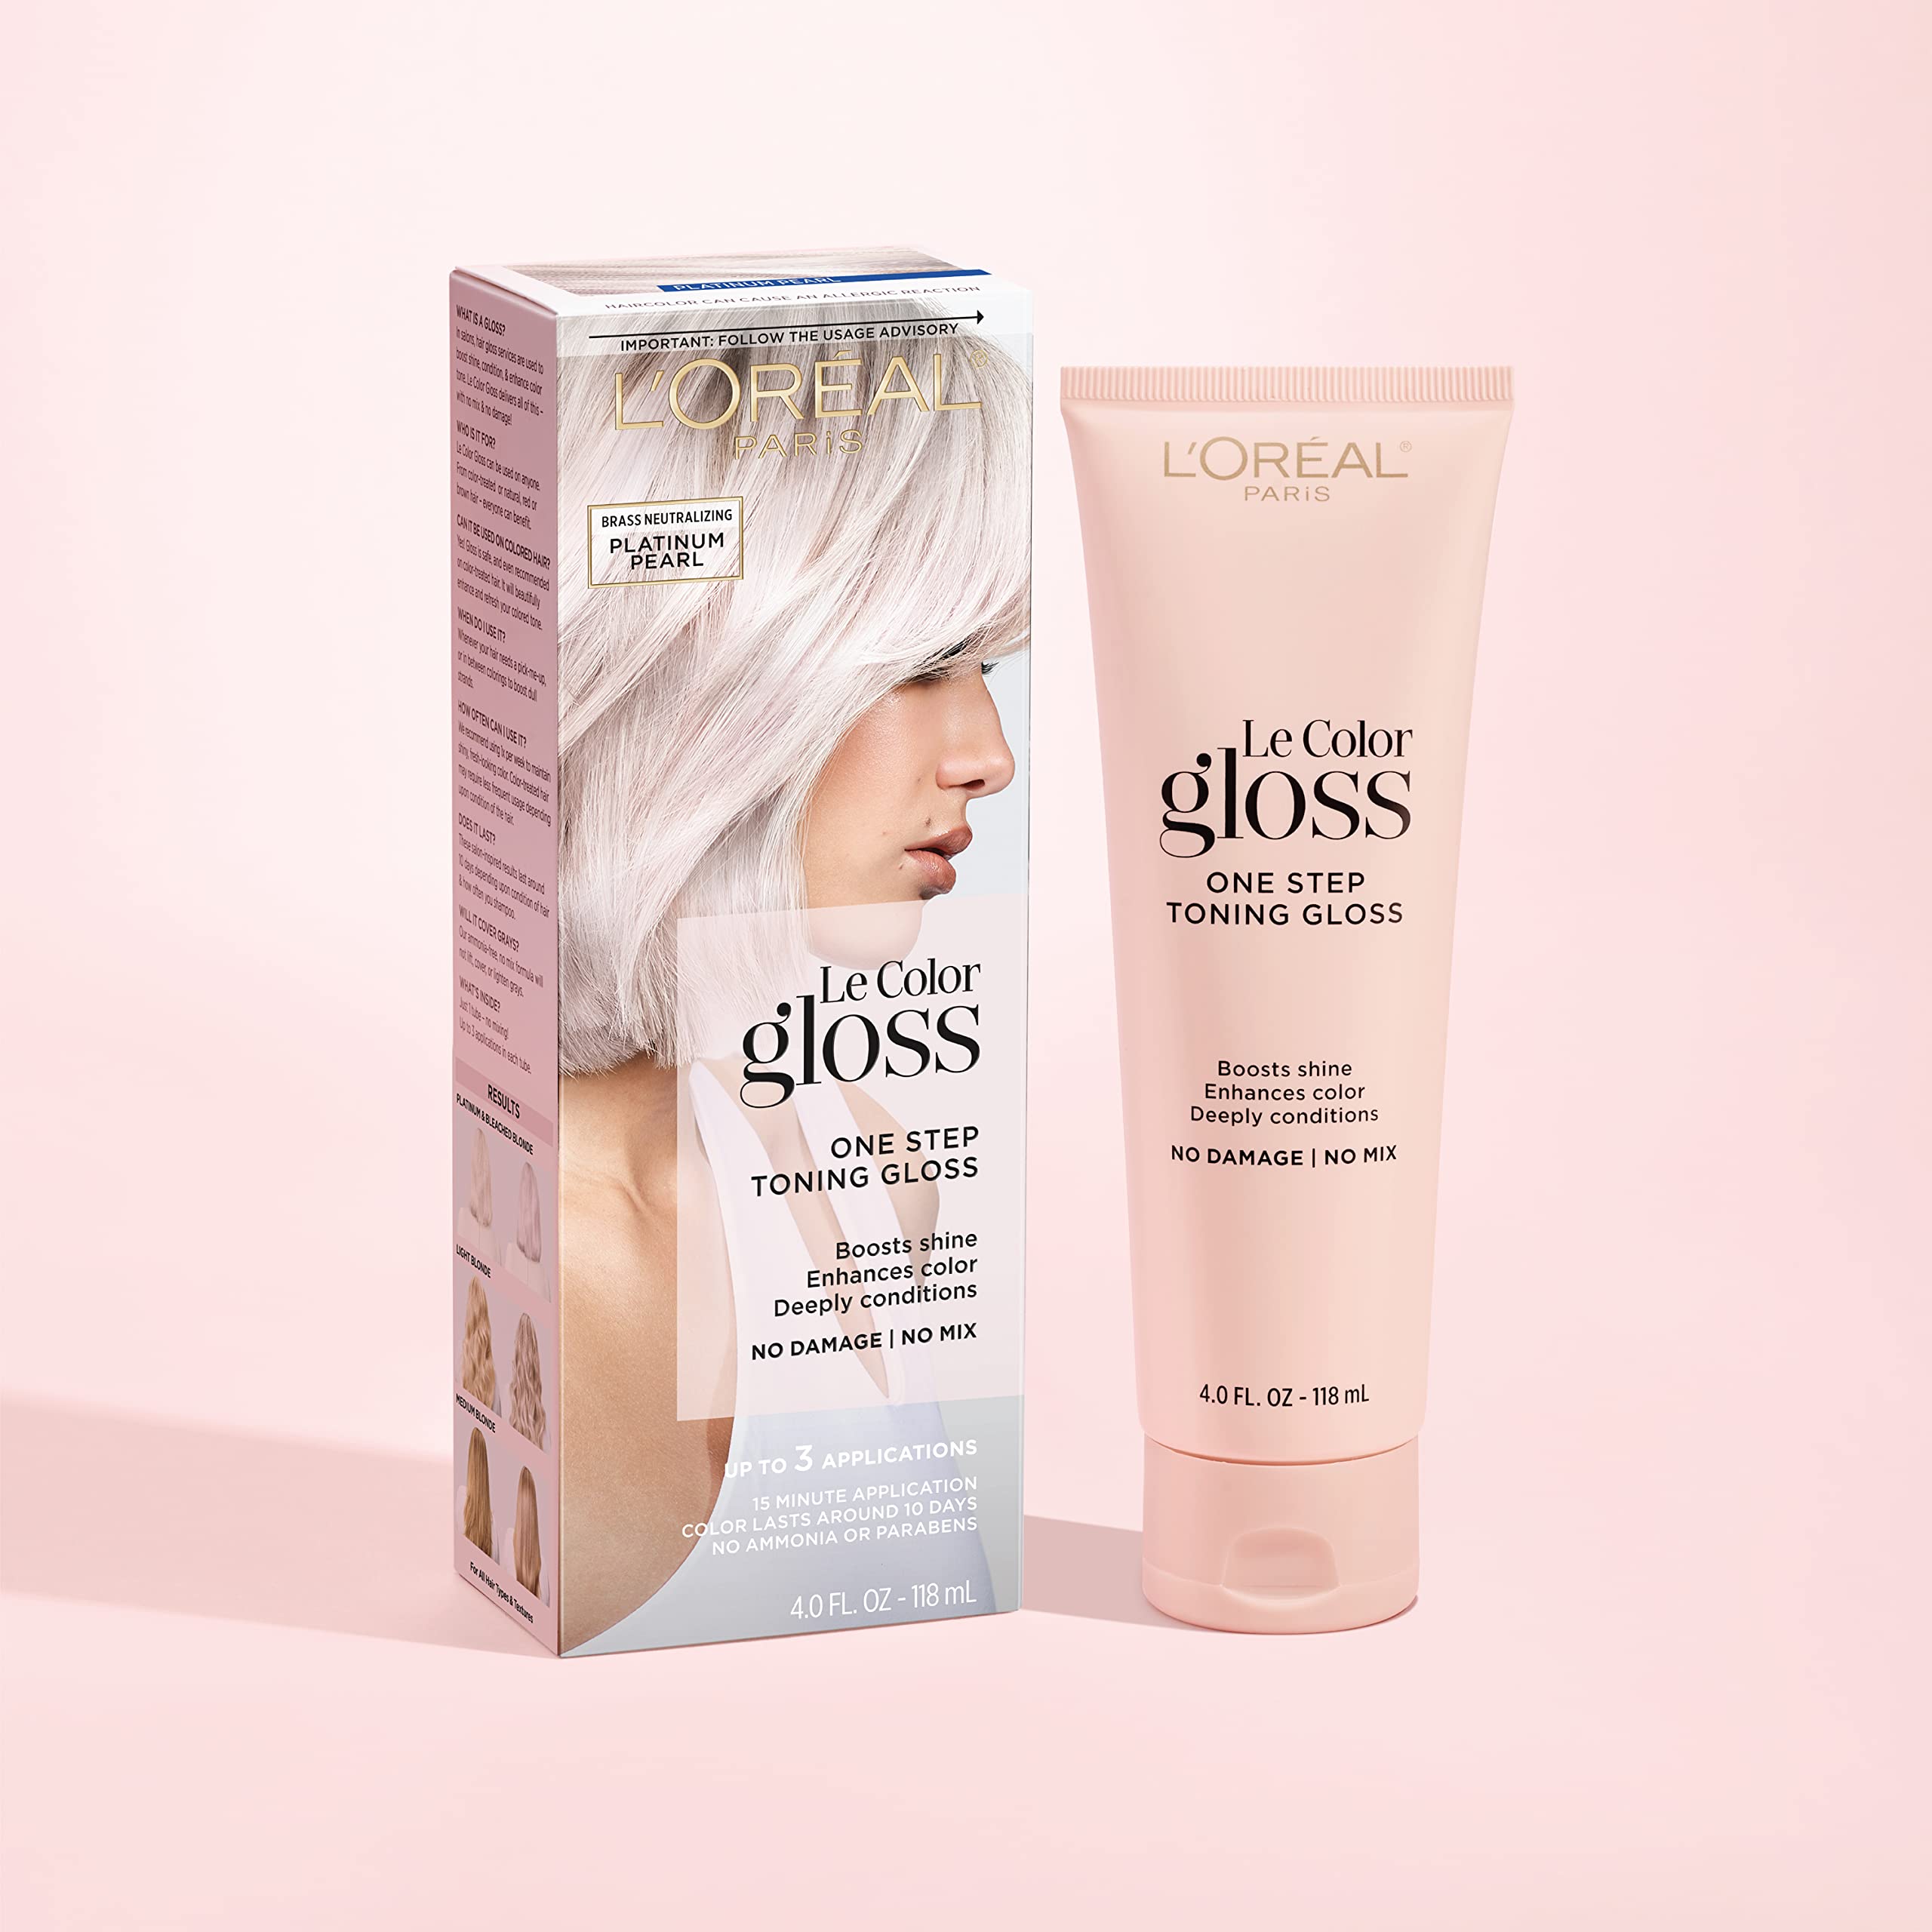 L’Oréal Paris Le Color Gloss One Step In-Shower Toning Hair Gloss for Bleached Hair, Neutralizes Brass, Conditions & Boosts Shine, Platinum Pearl, 4 Ounce